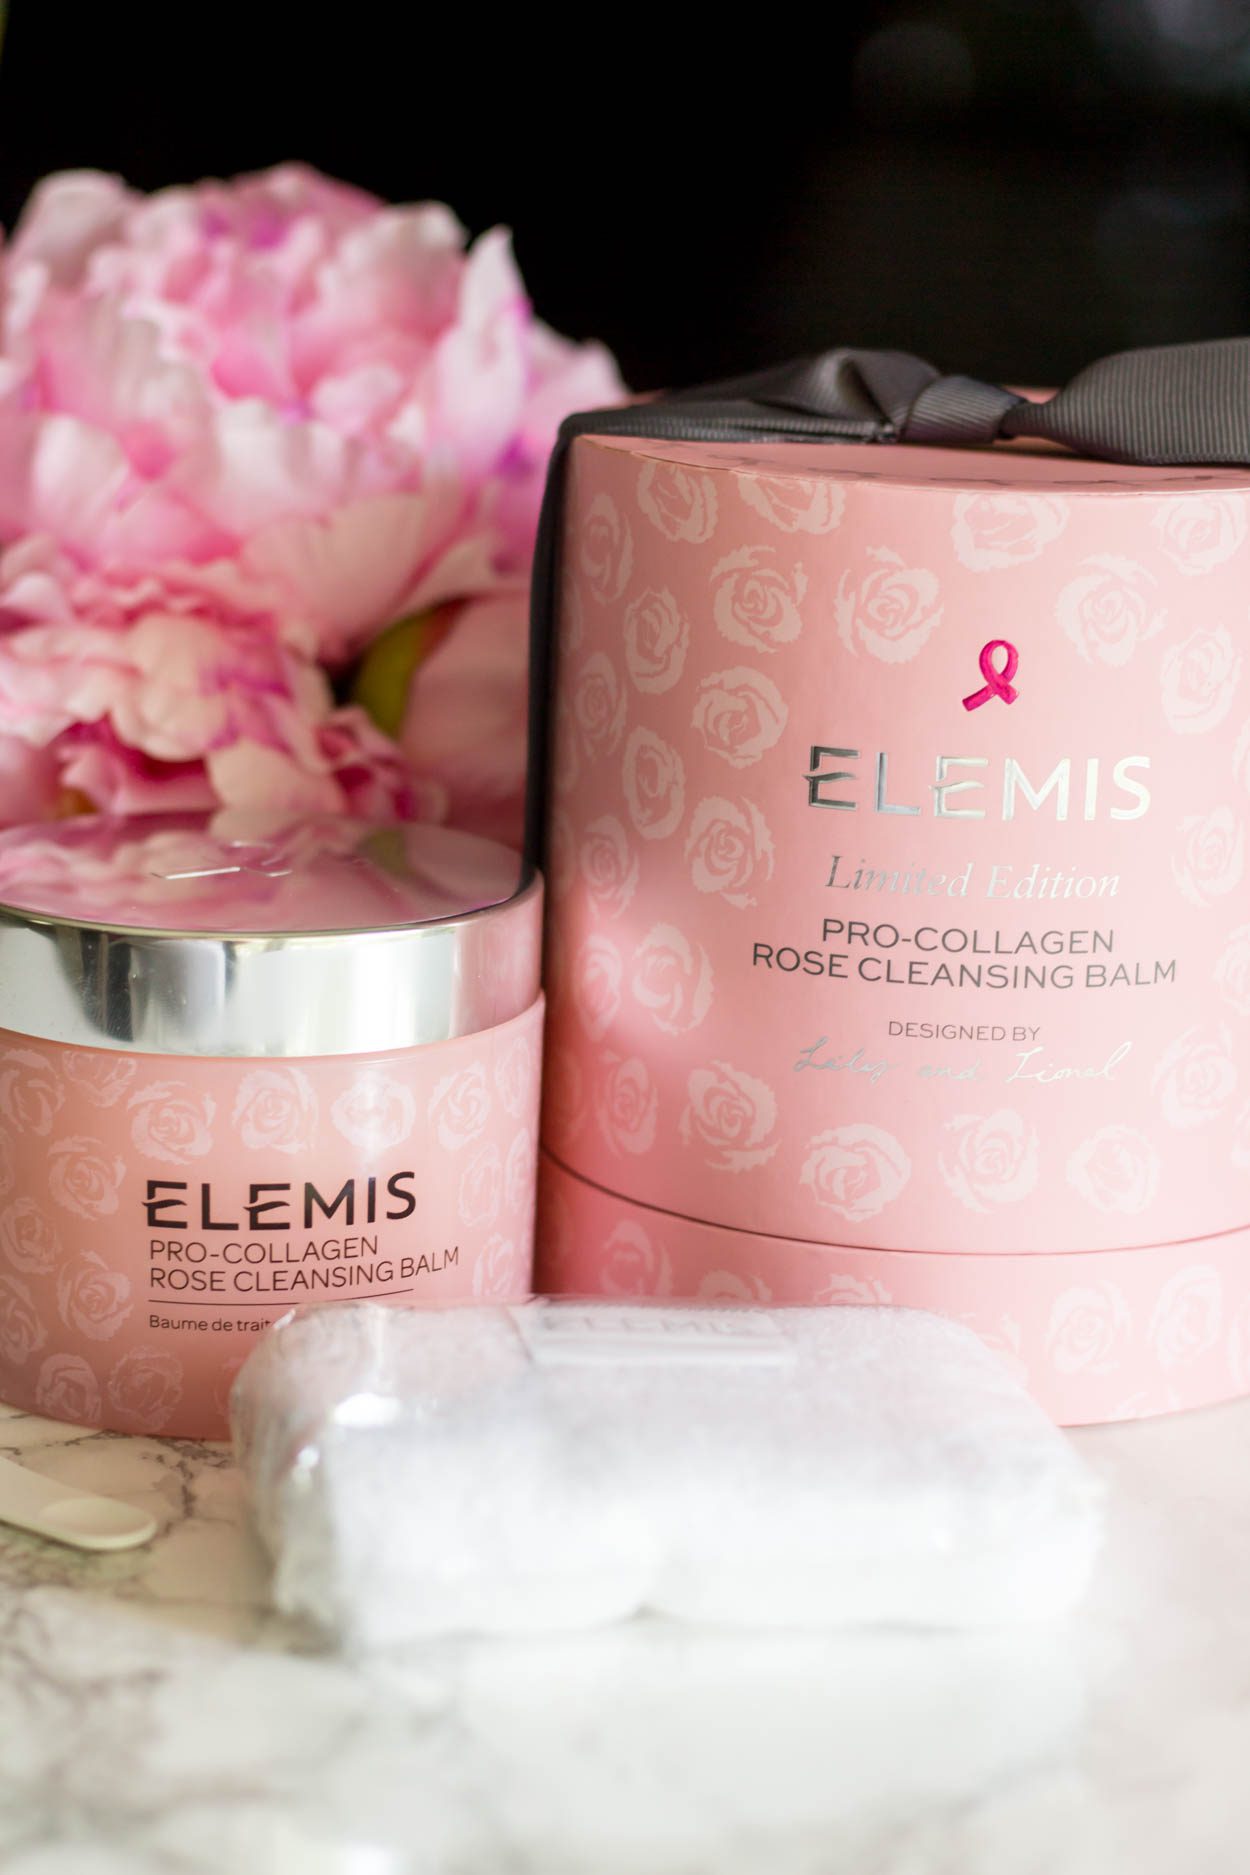 ELEMIS LIMITED-EDITION Pro-Collagen Rose Cleansing Balm. A Limited-Edition Cleansing Balm with proceeds benefiting Breast Cancer Research. #beauty #breastcancerawareness #Skincare